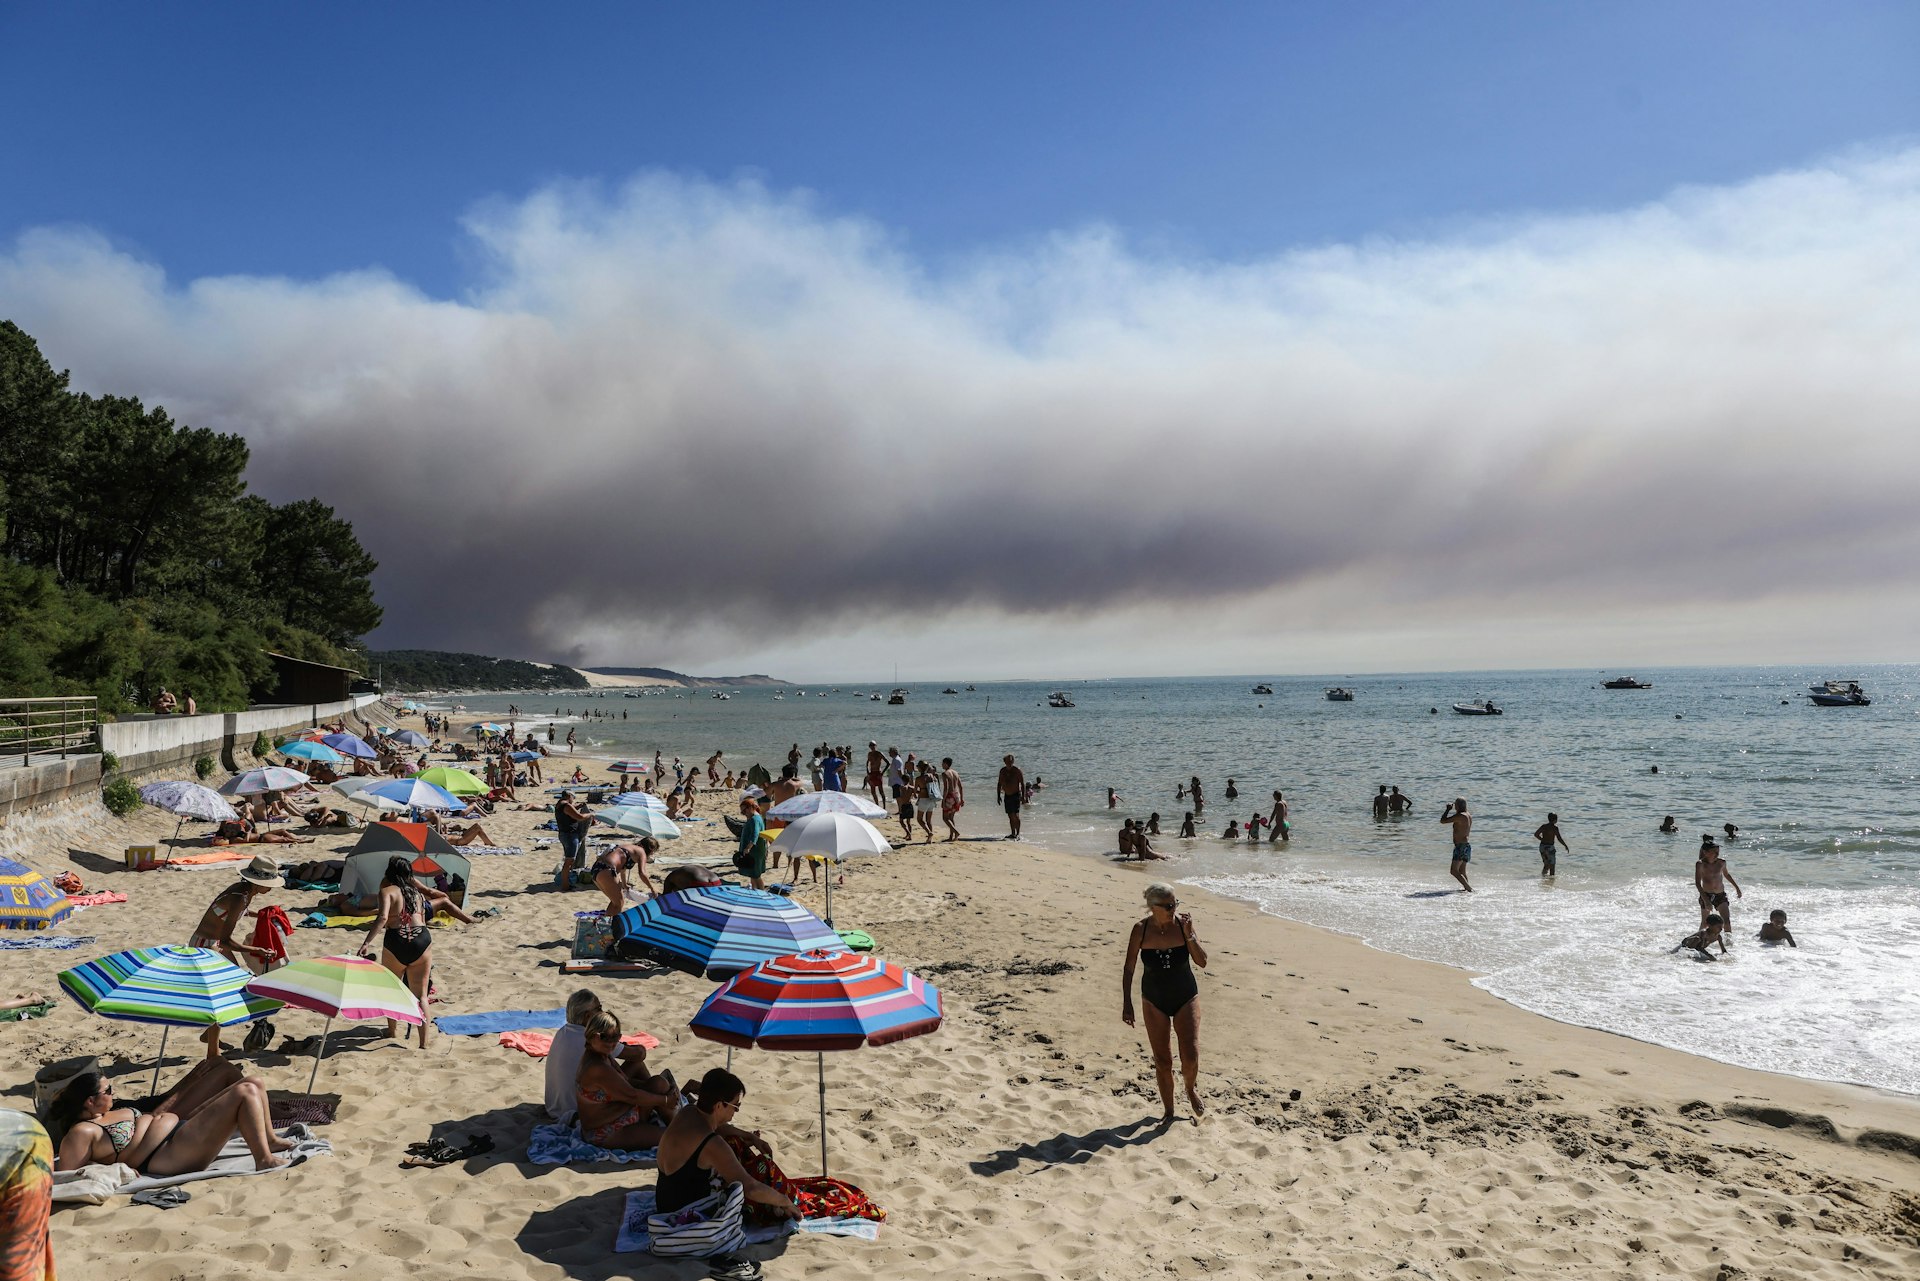 Beach-goers bathe and lay at a beach of "Pyla sur mer" as a black cloud of smoke from a fire that hit La Teste-de-Buch forest rises 